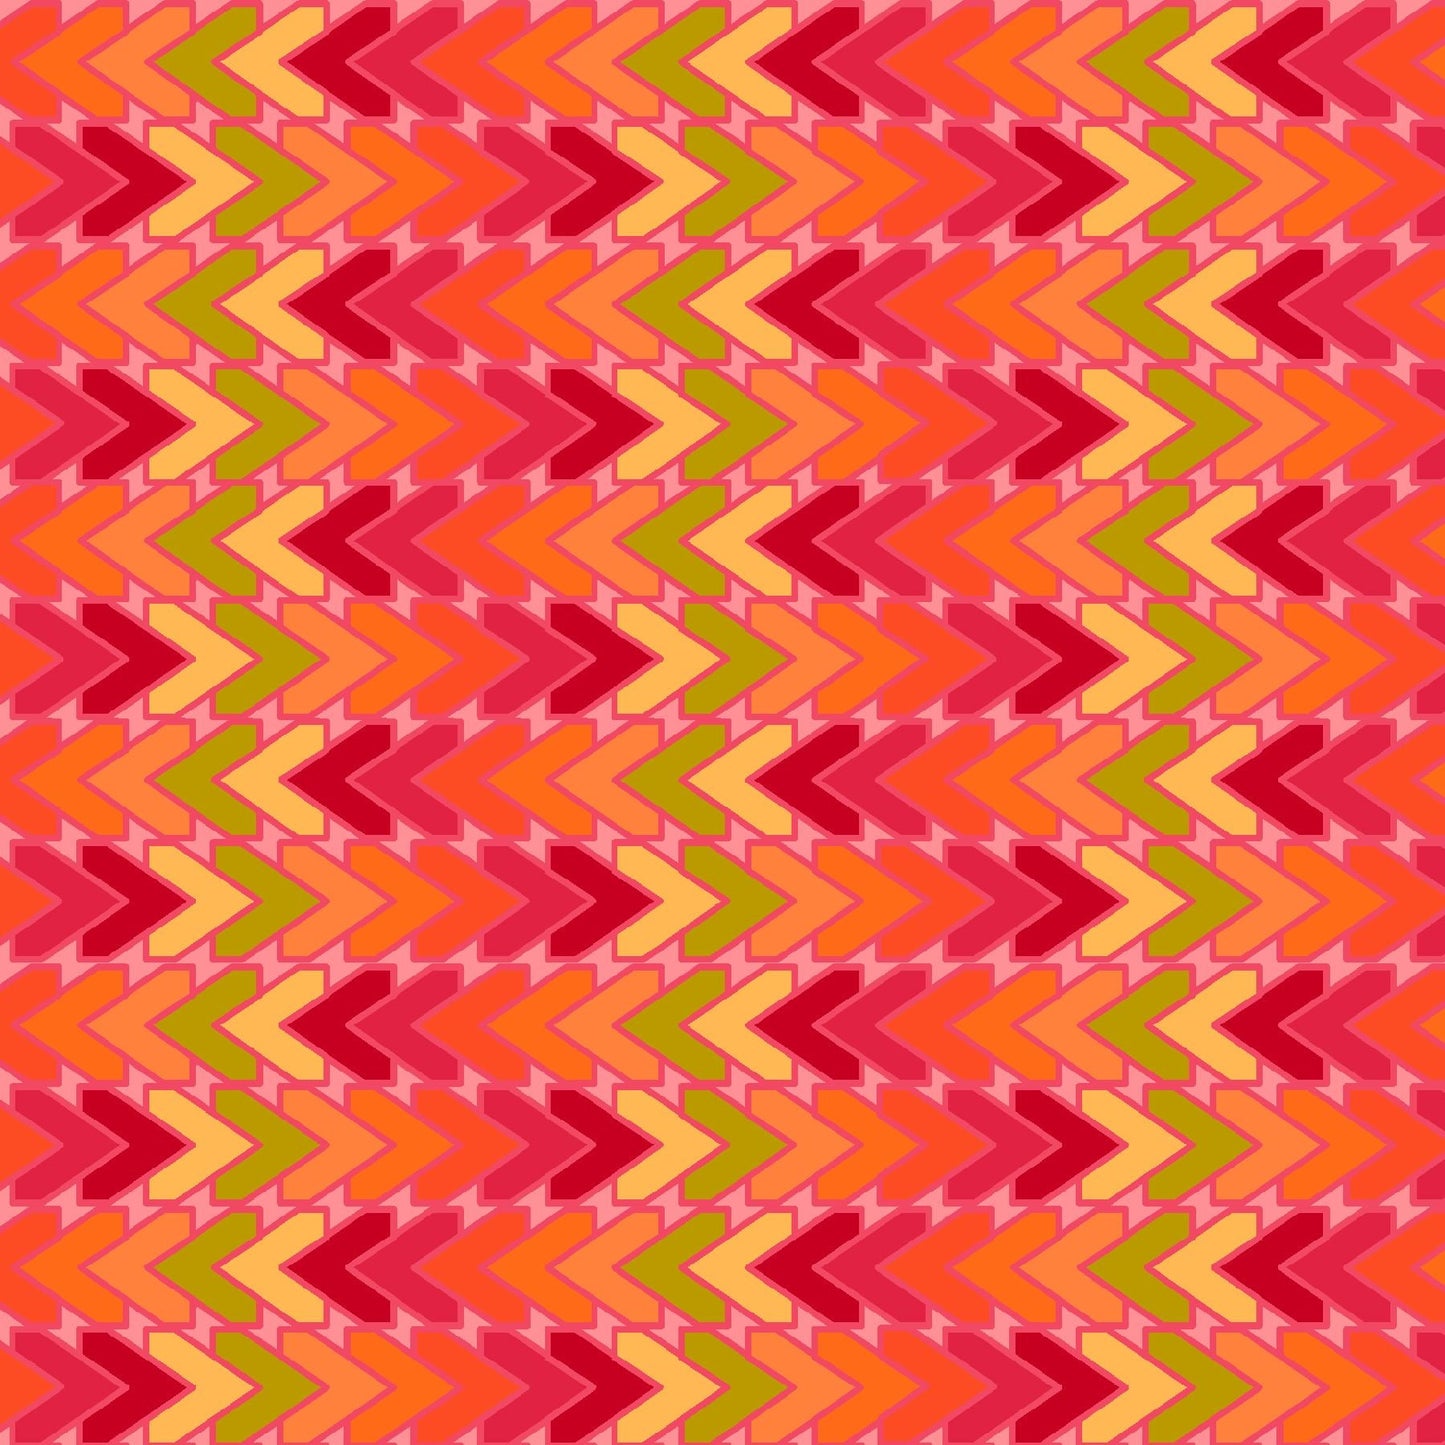 All Lined Up by Judy Gauthier Red/Orange Chevron 5381-83 Digitally Printed Cotton Woven Fabric